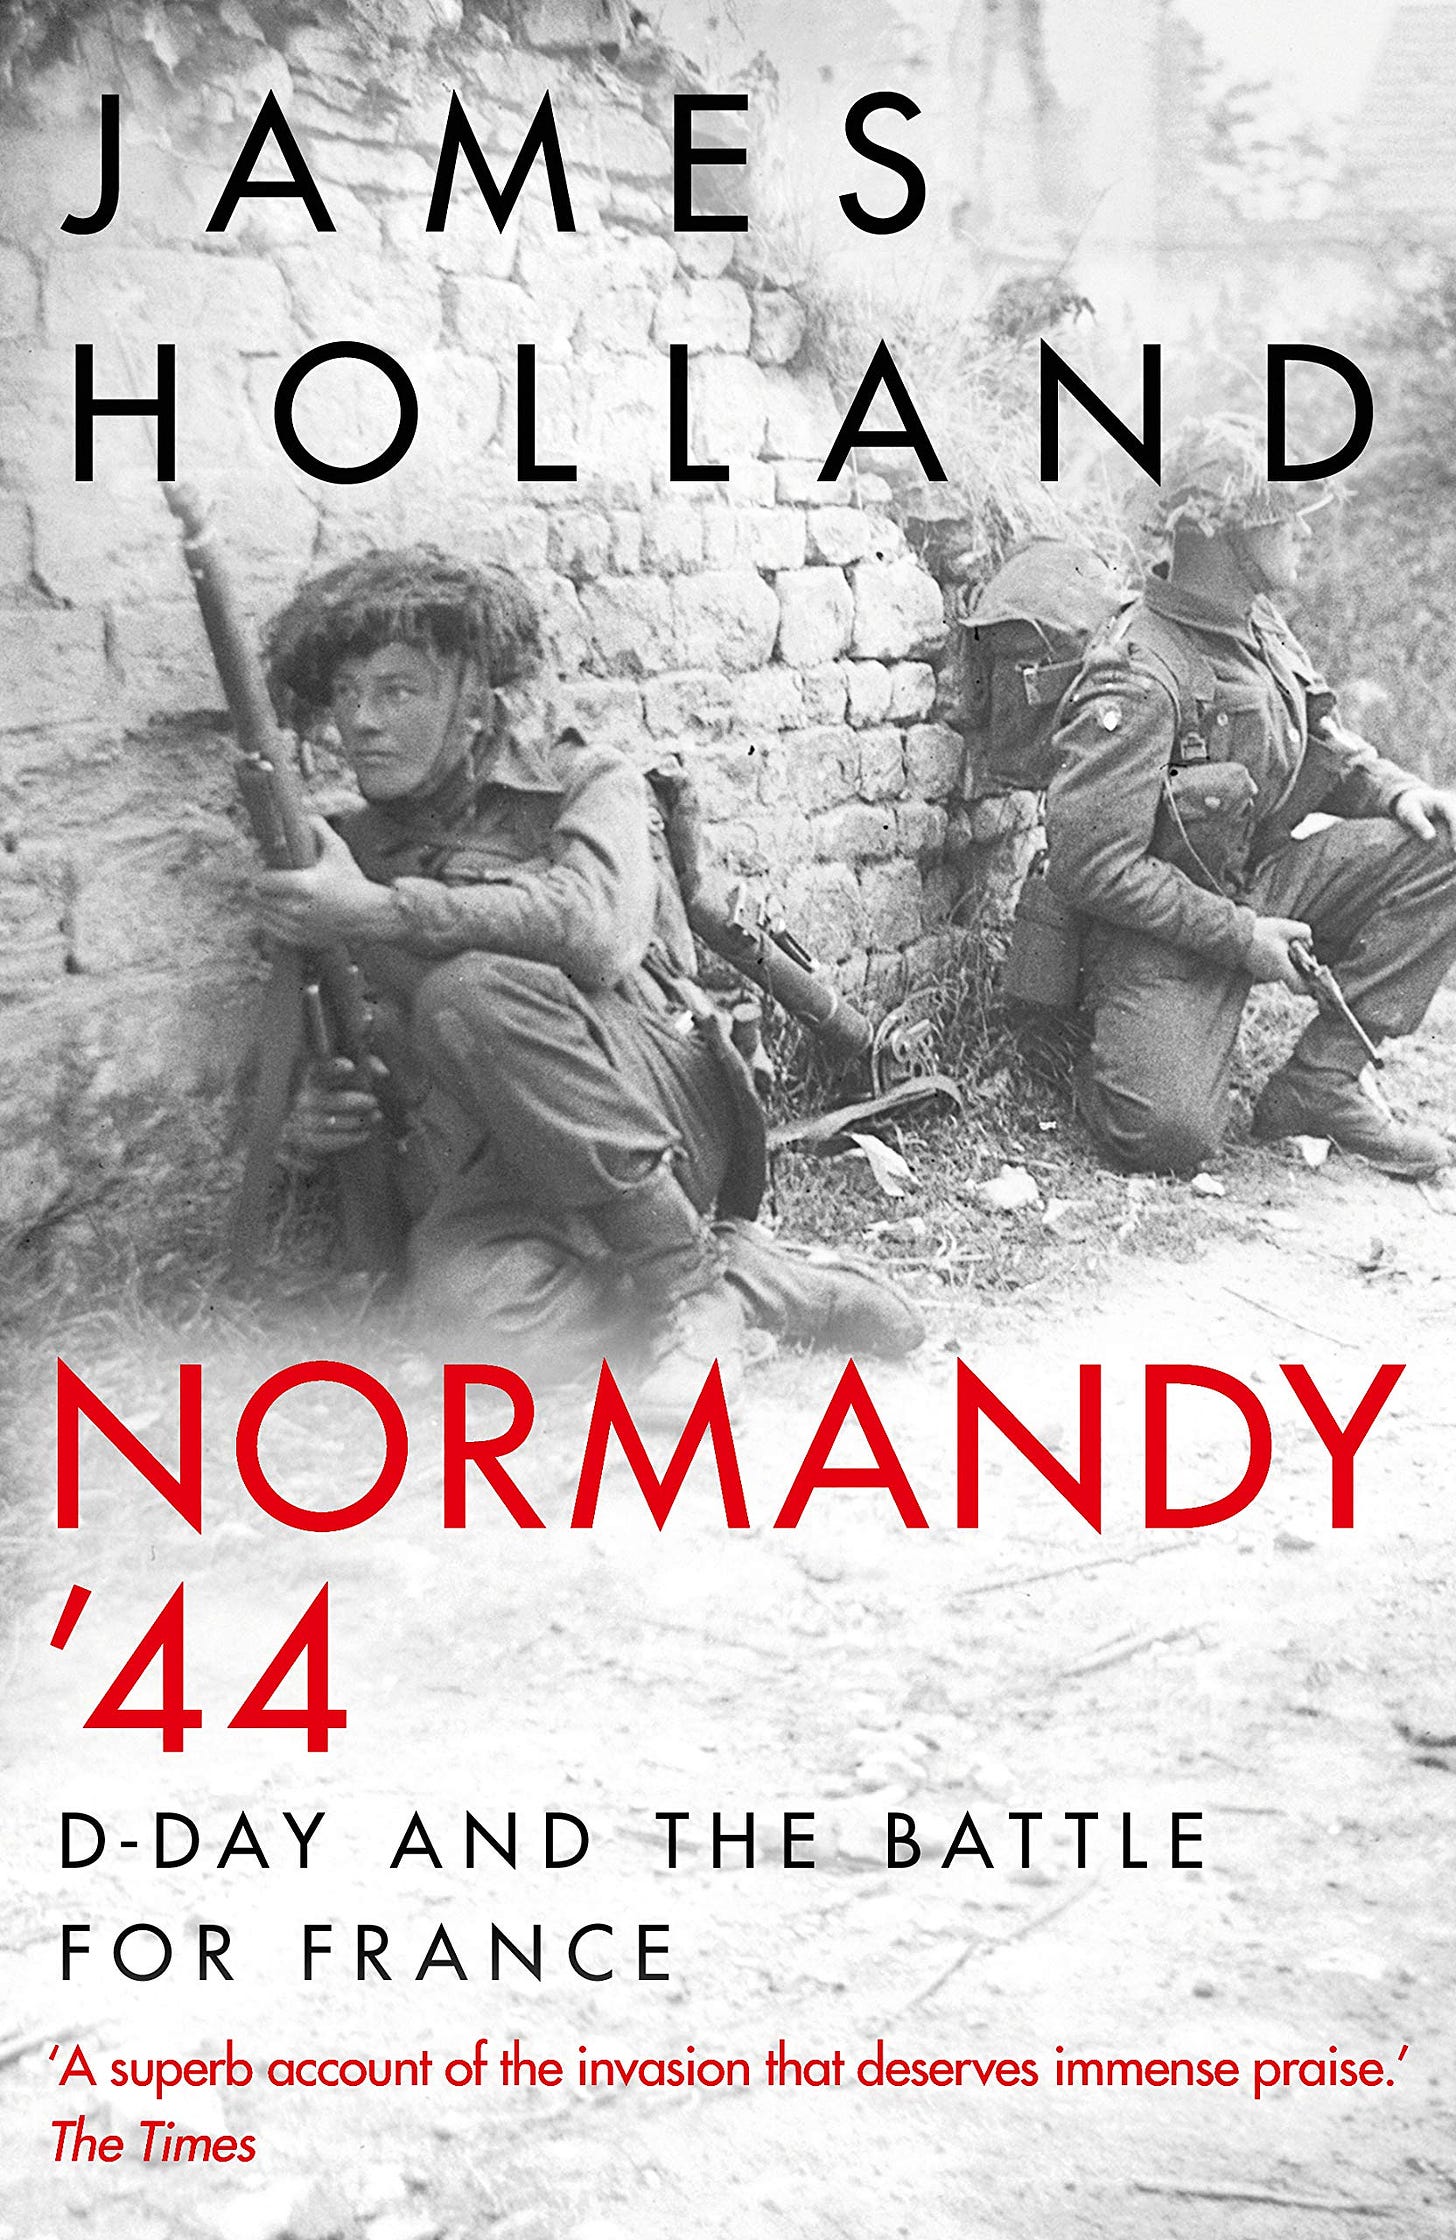 Normandy '44: D-Day and the Battle for France : Holland, James:  Amazon.co.uk: Books